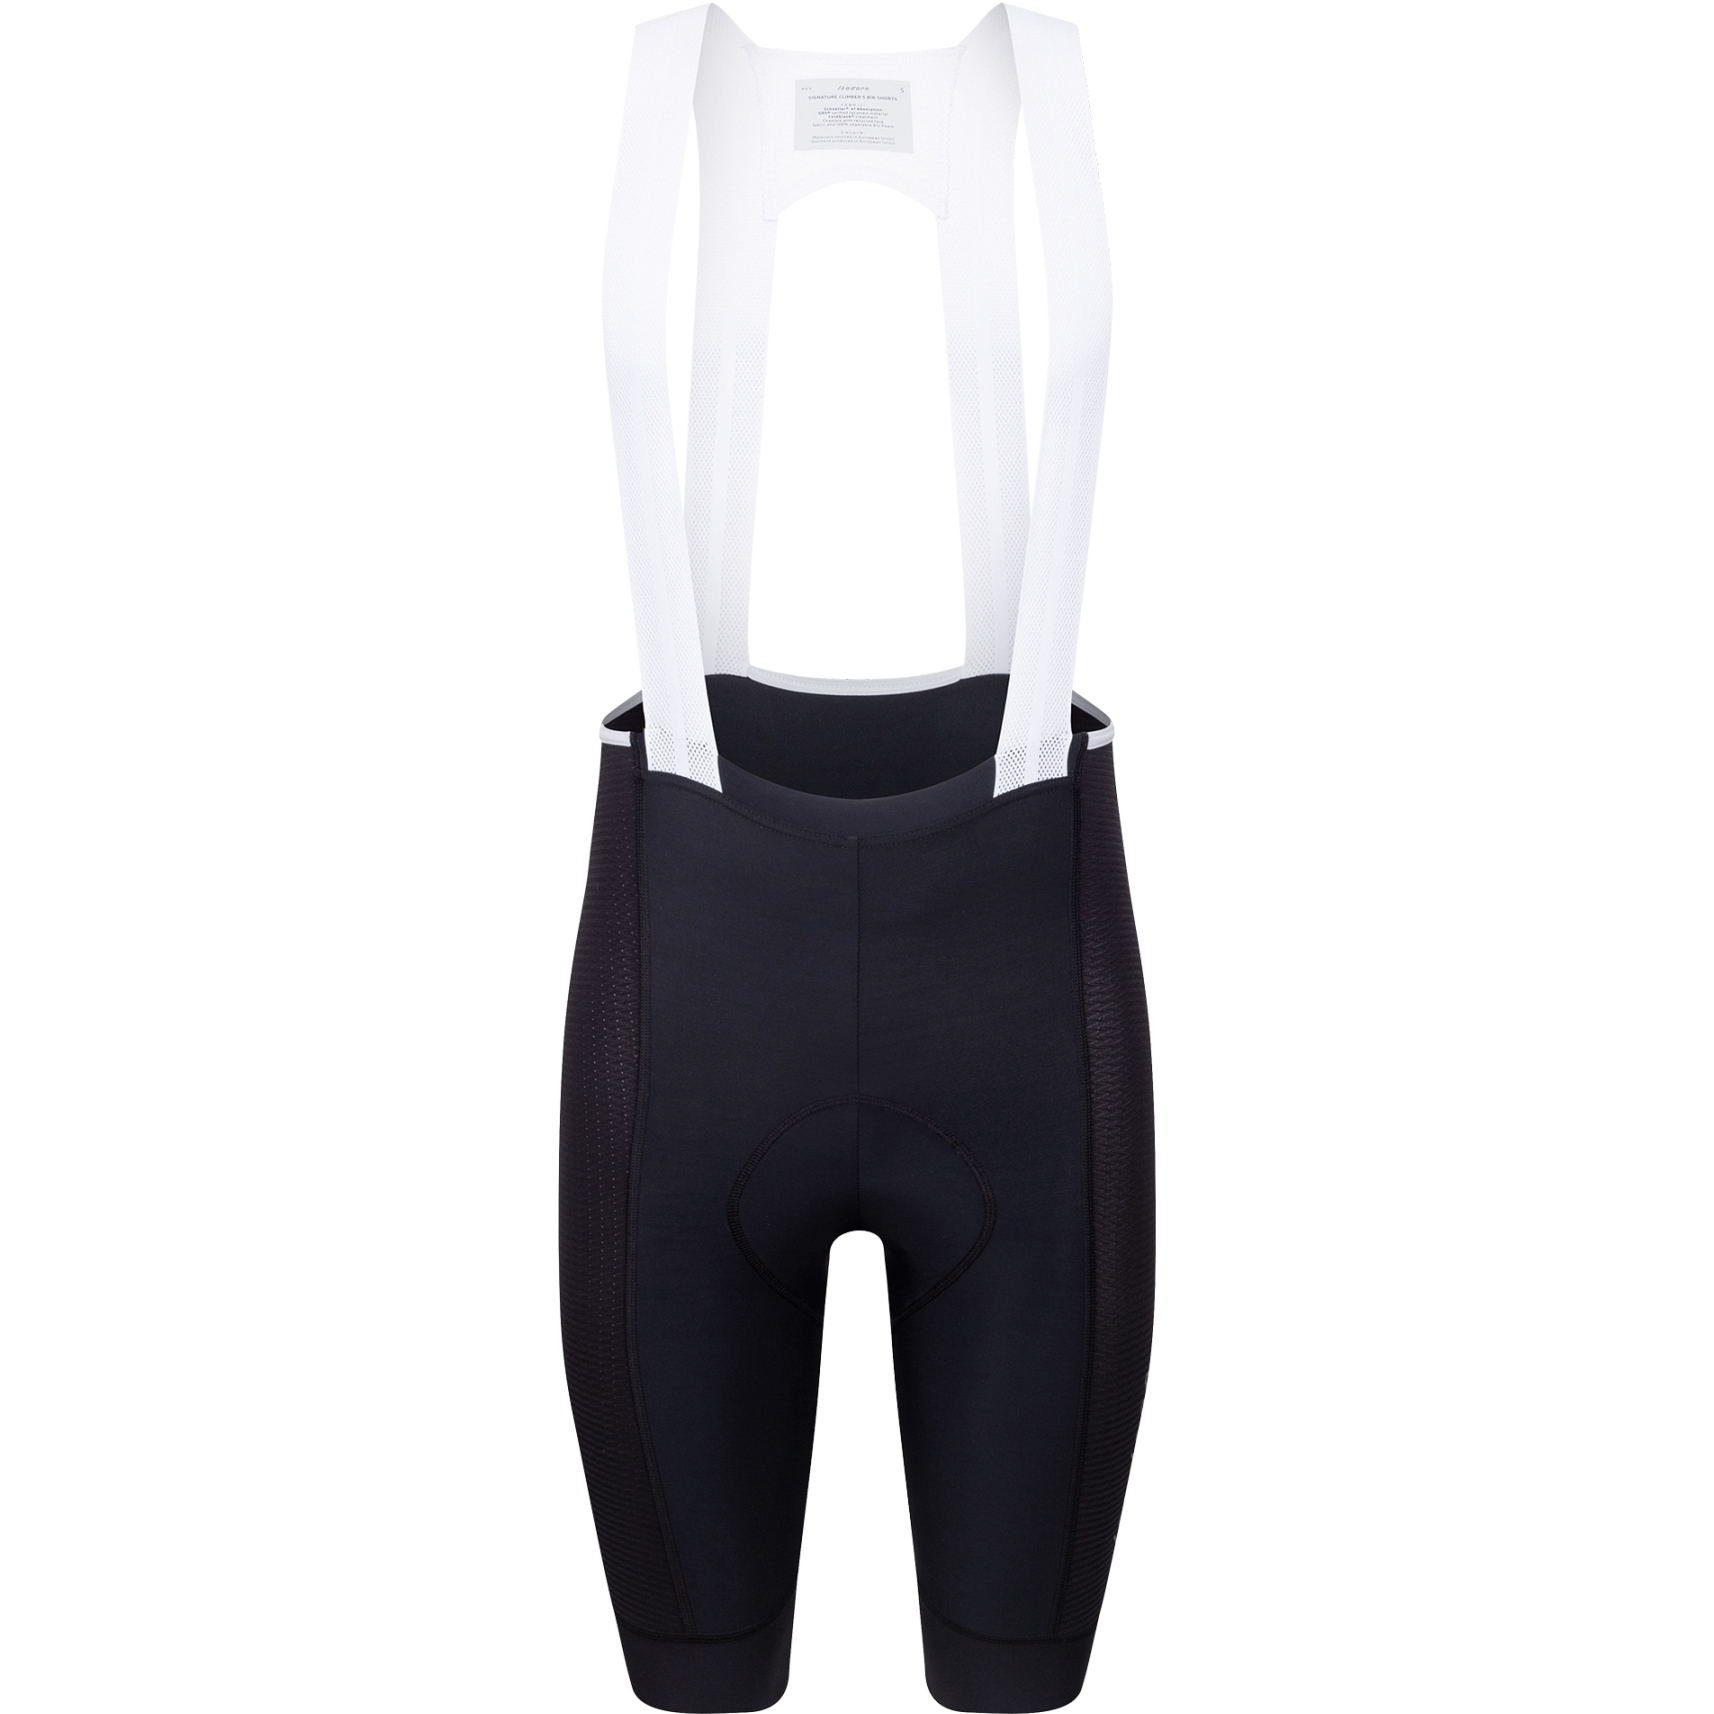 Picture of Isadore Signature Climbers 2.0 Bib Shorts - Black